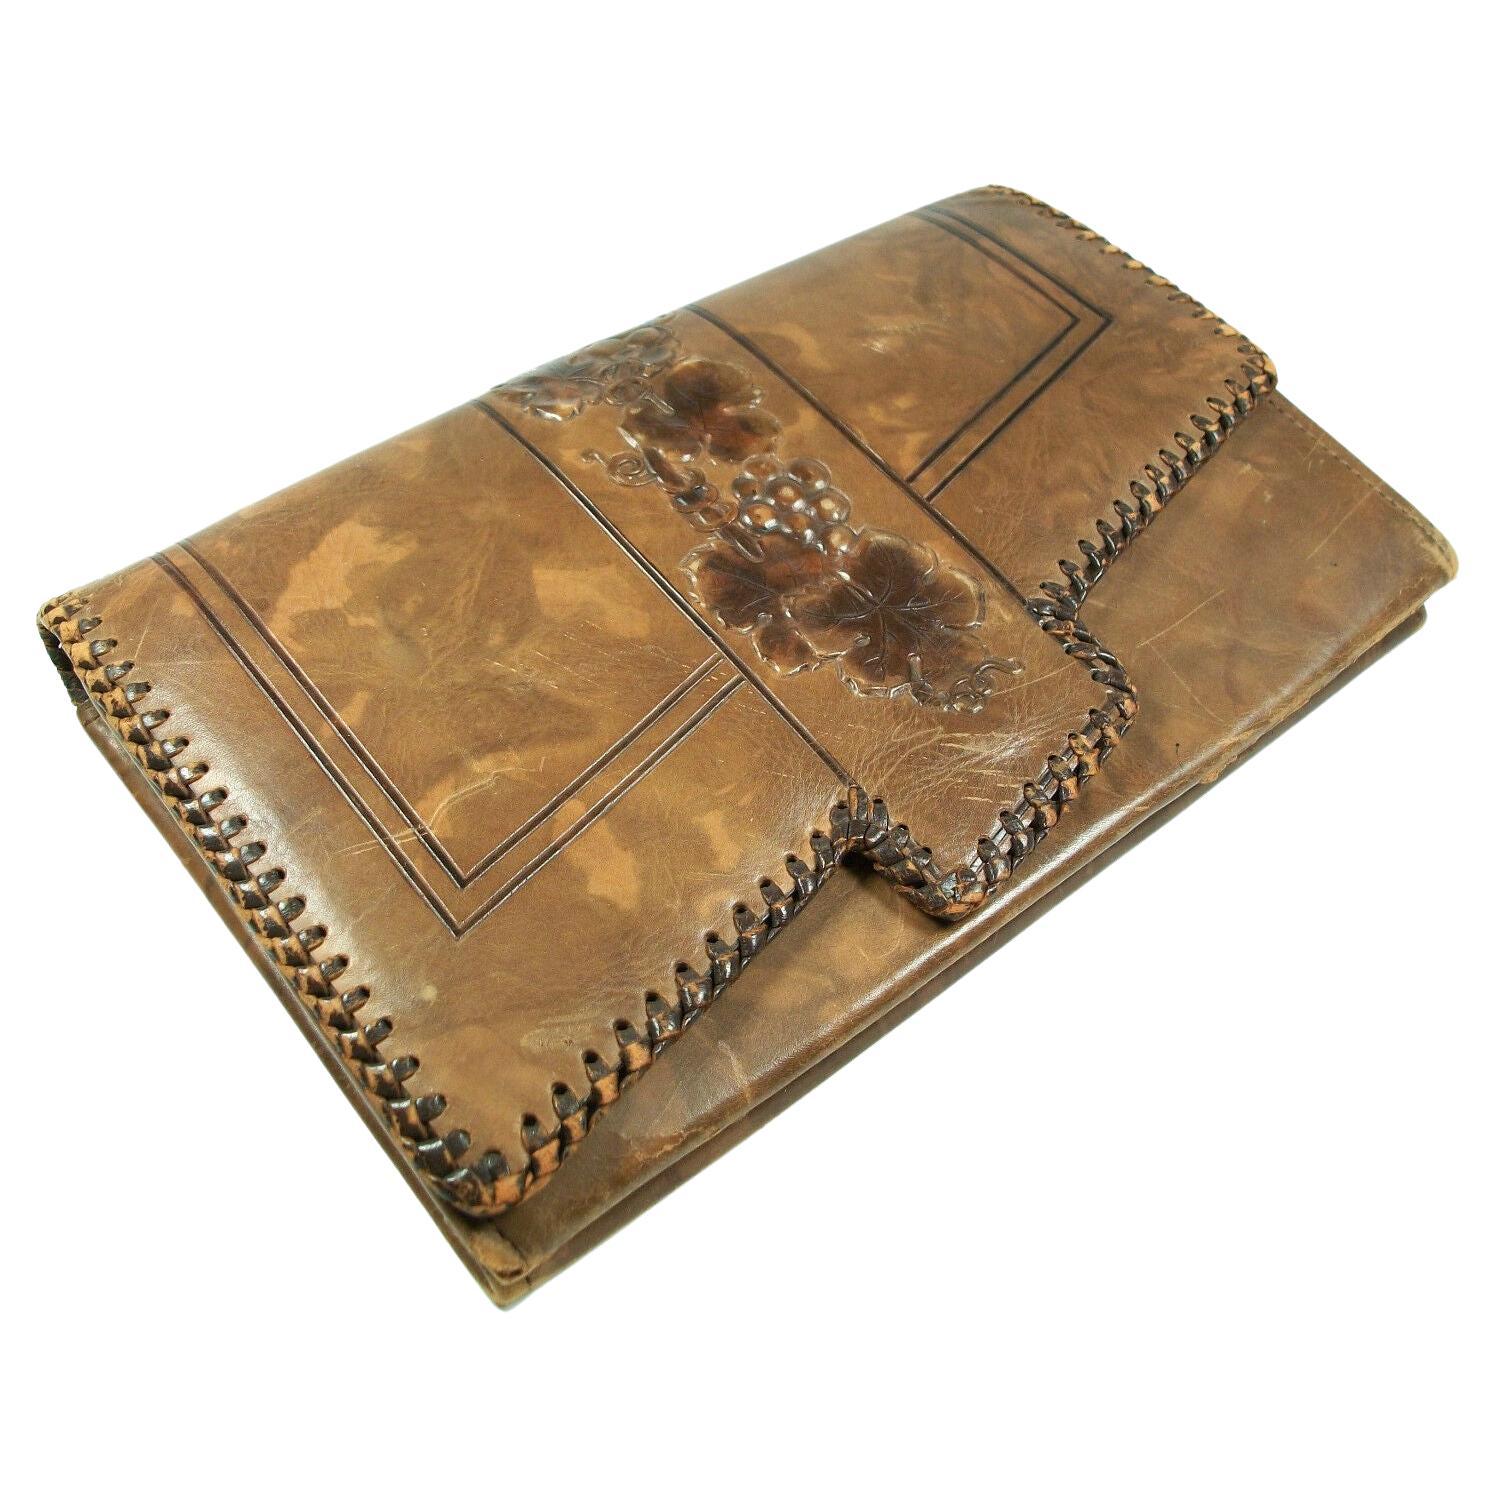 ARDEN FOREST - Vintage Tooled Leather Clutch - Whip-stitched Edge - Circa 1930's For Sale